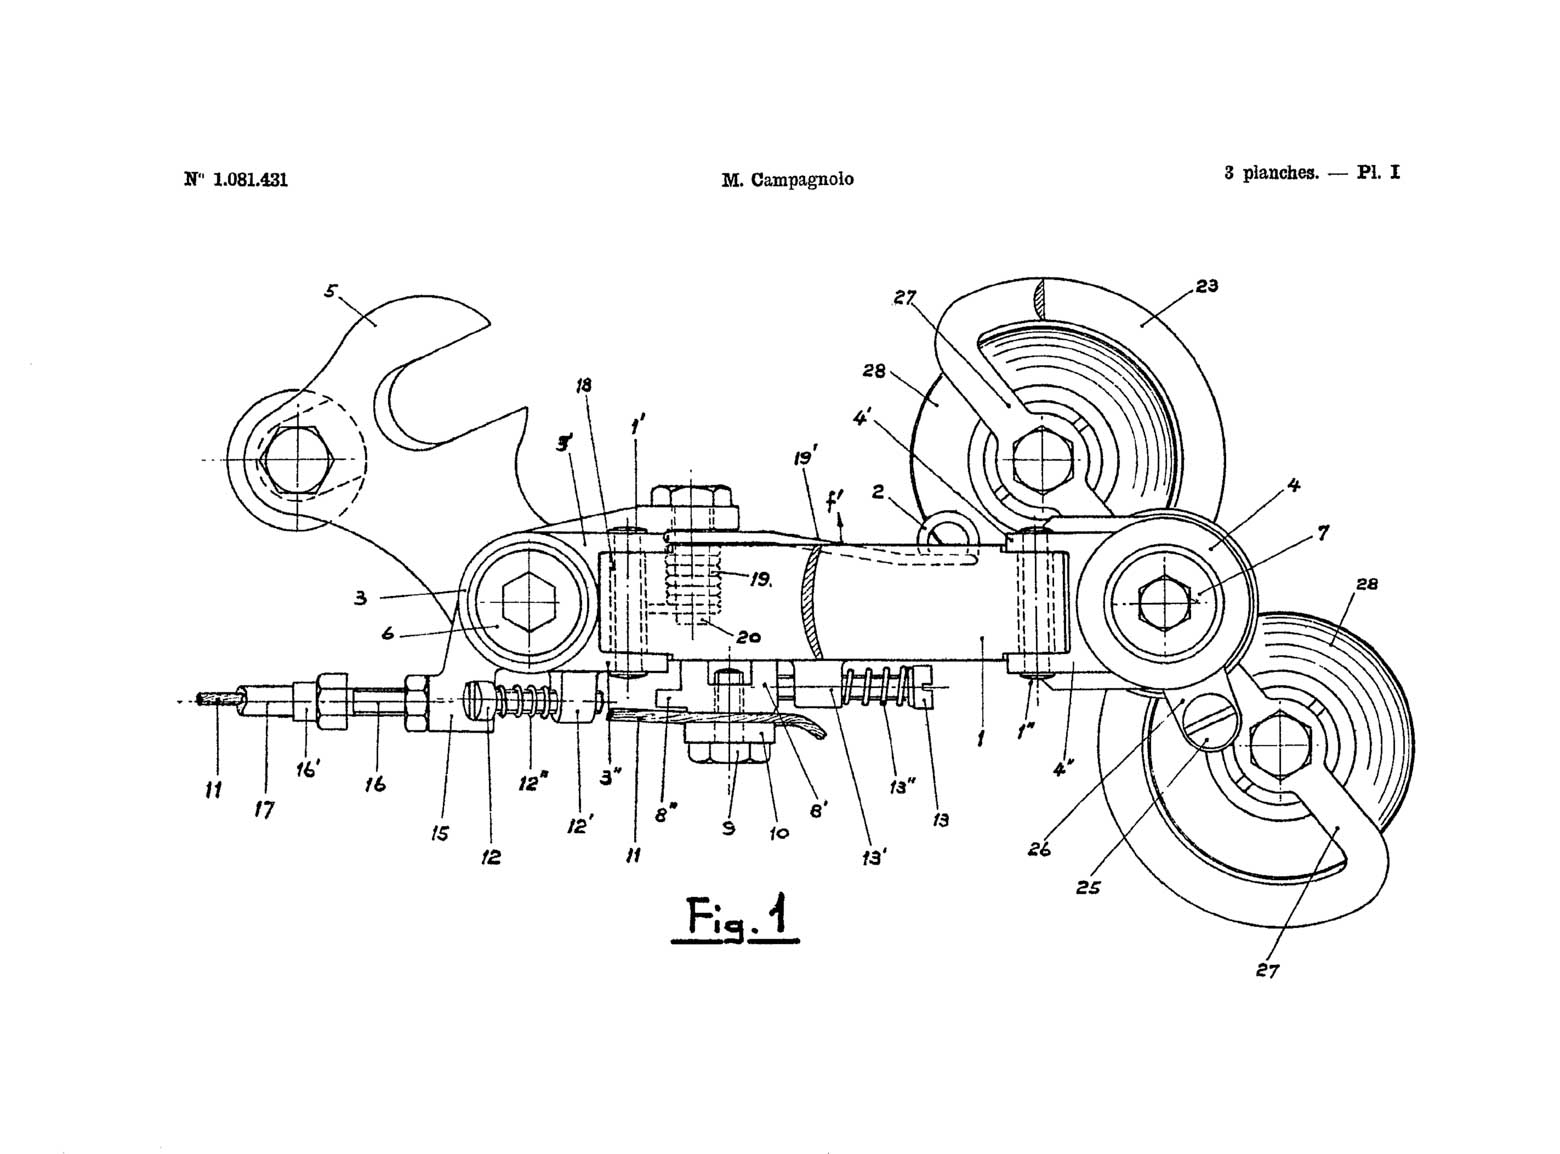 French Patent 1,081,431 - Campagnolo scan 004 main image